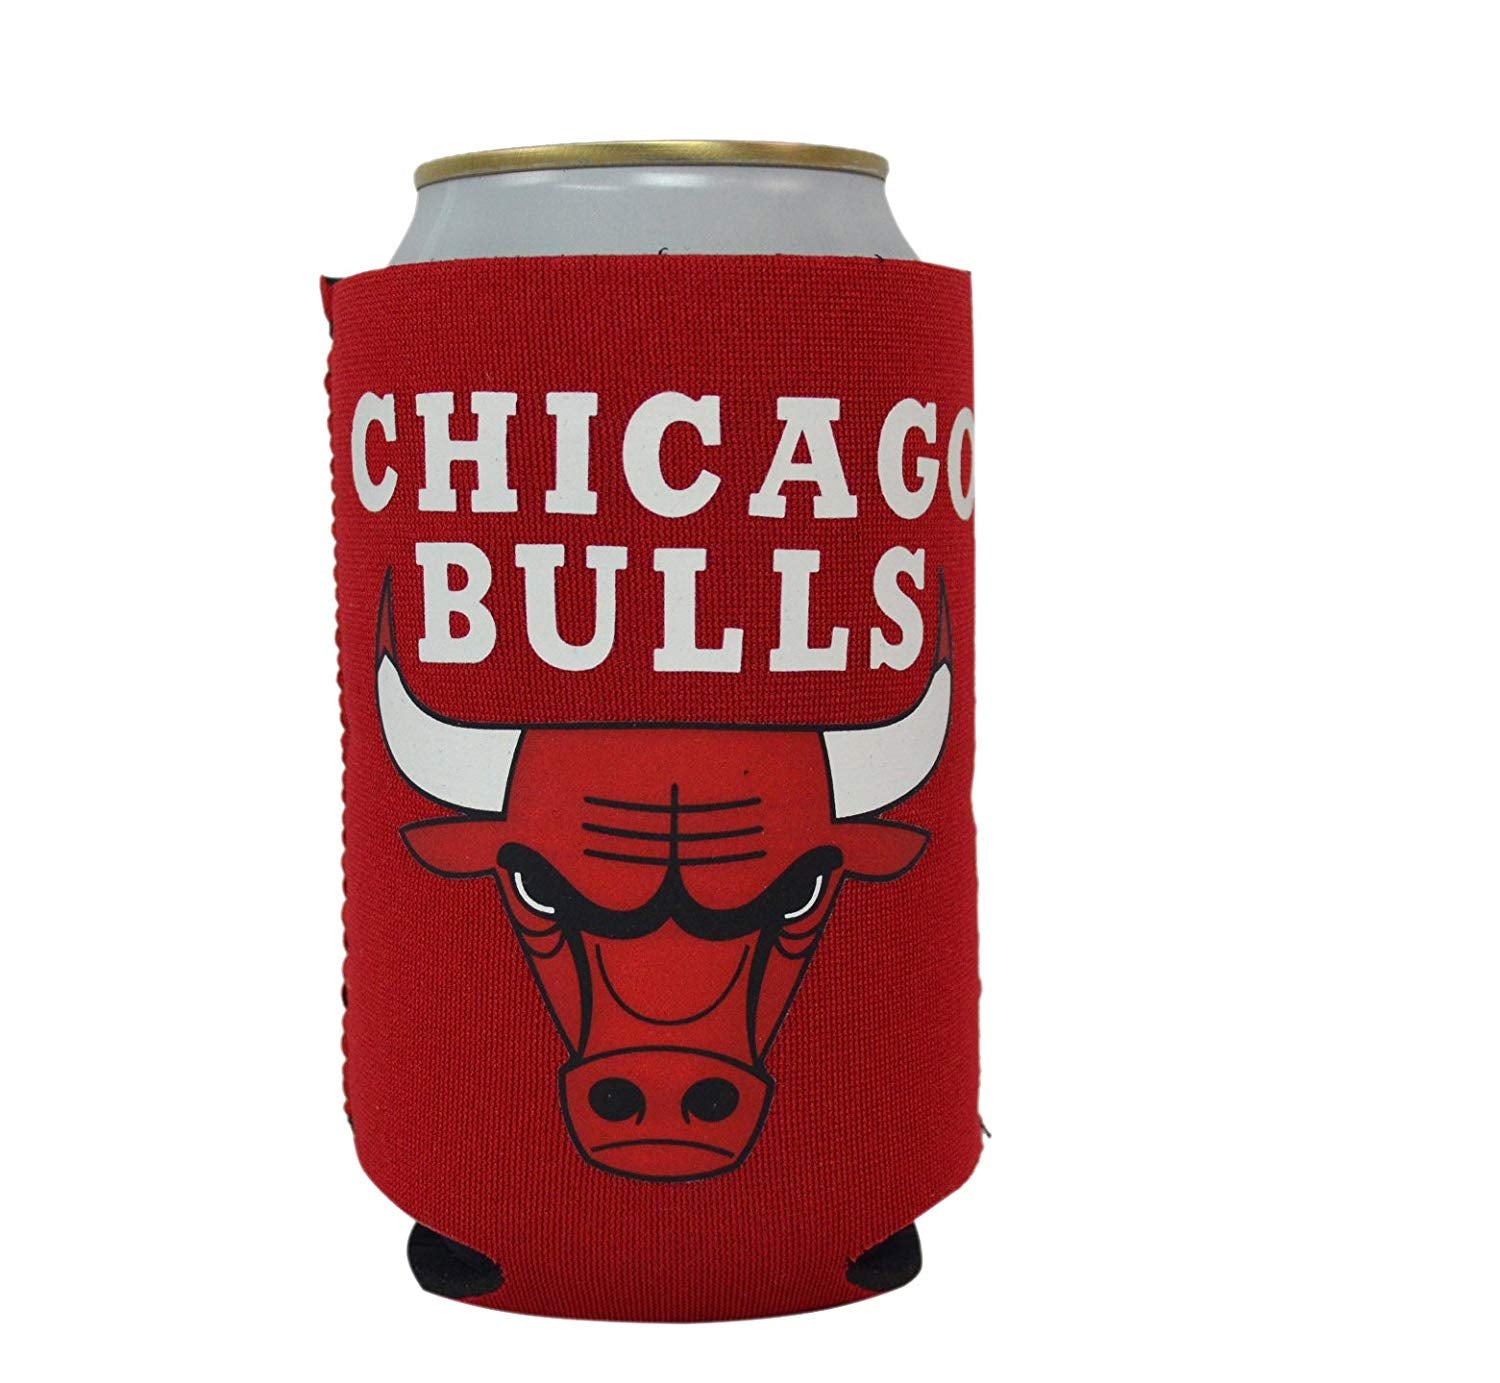 NBA Fan Shop Authentic 2-Pack Insulated 12 Oz Cold Can Cooler/Holder. Show Team Pride At Home, Tailgating or at the Game. Great for Fans